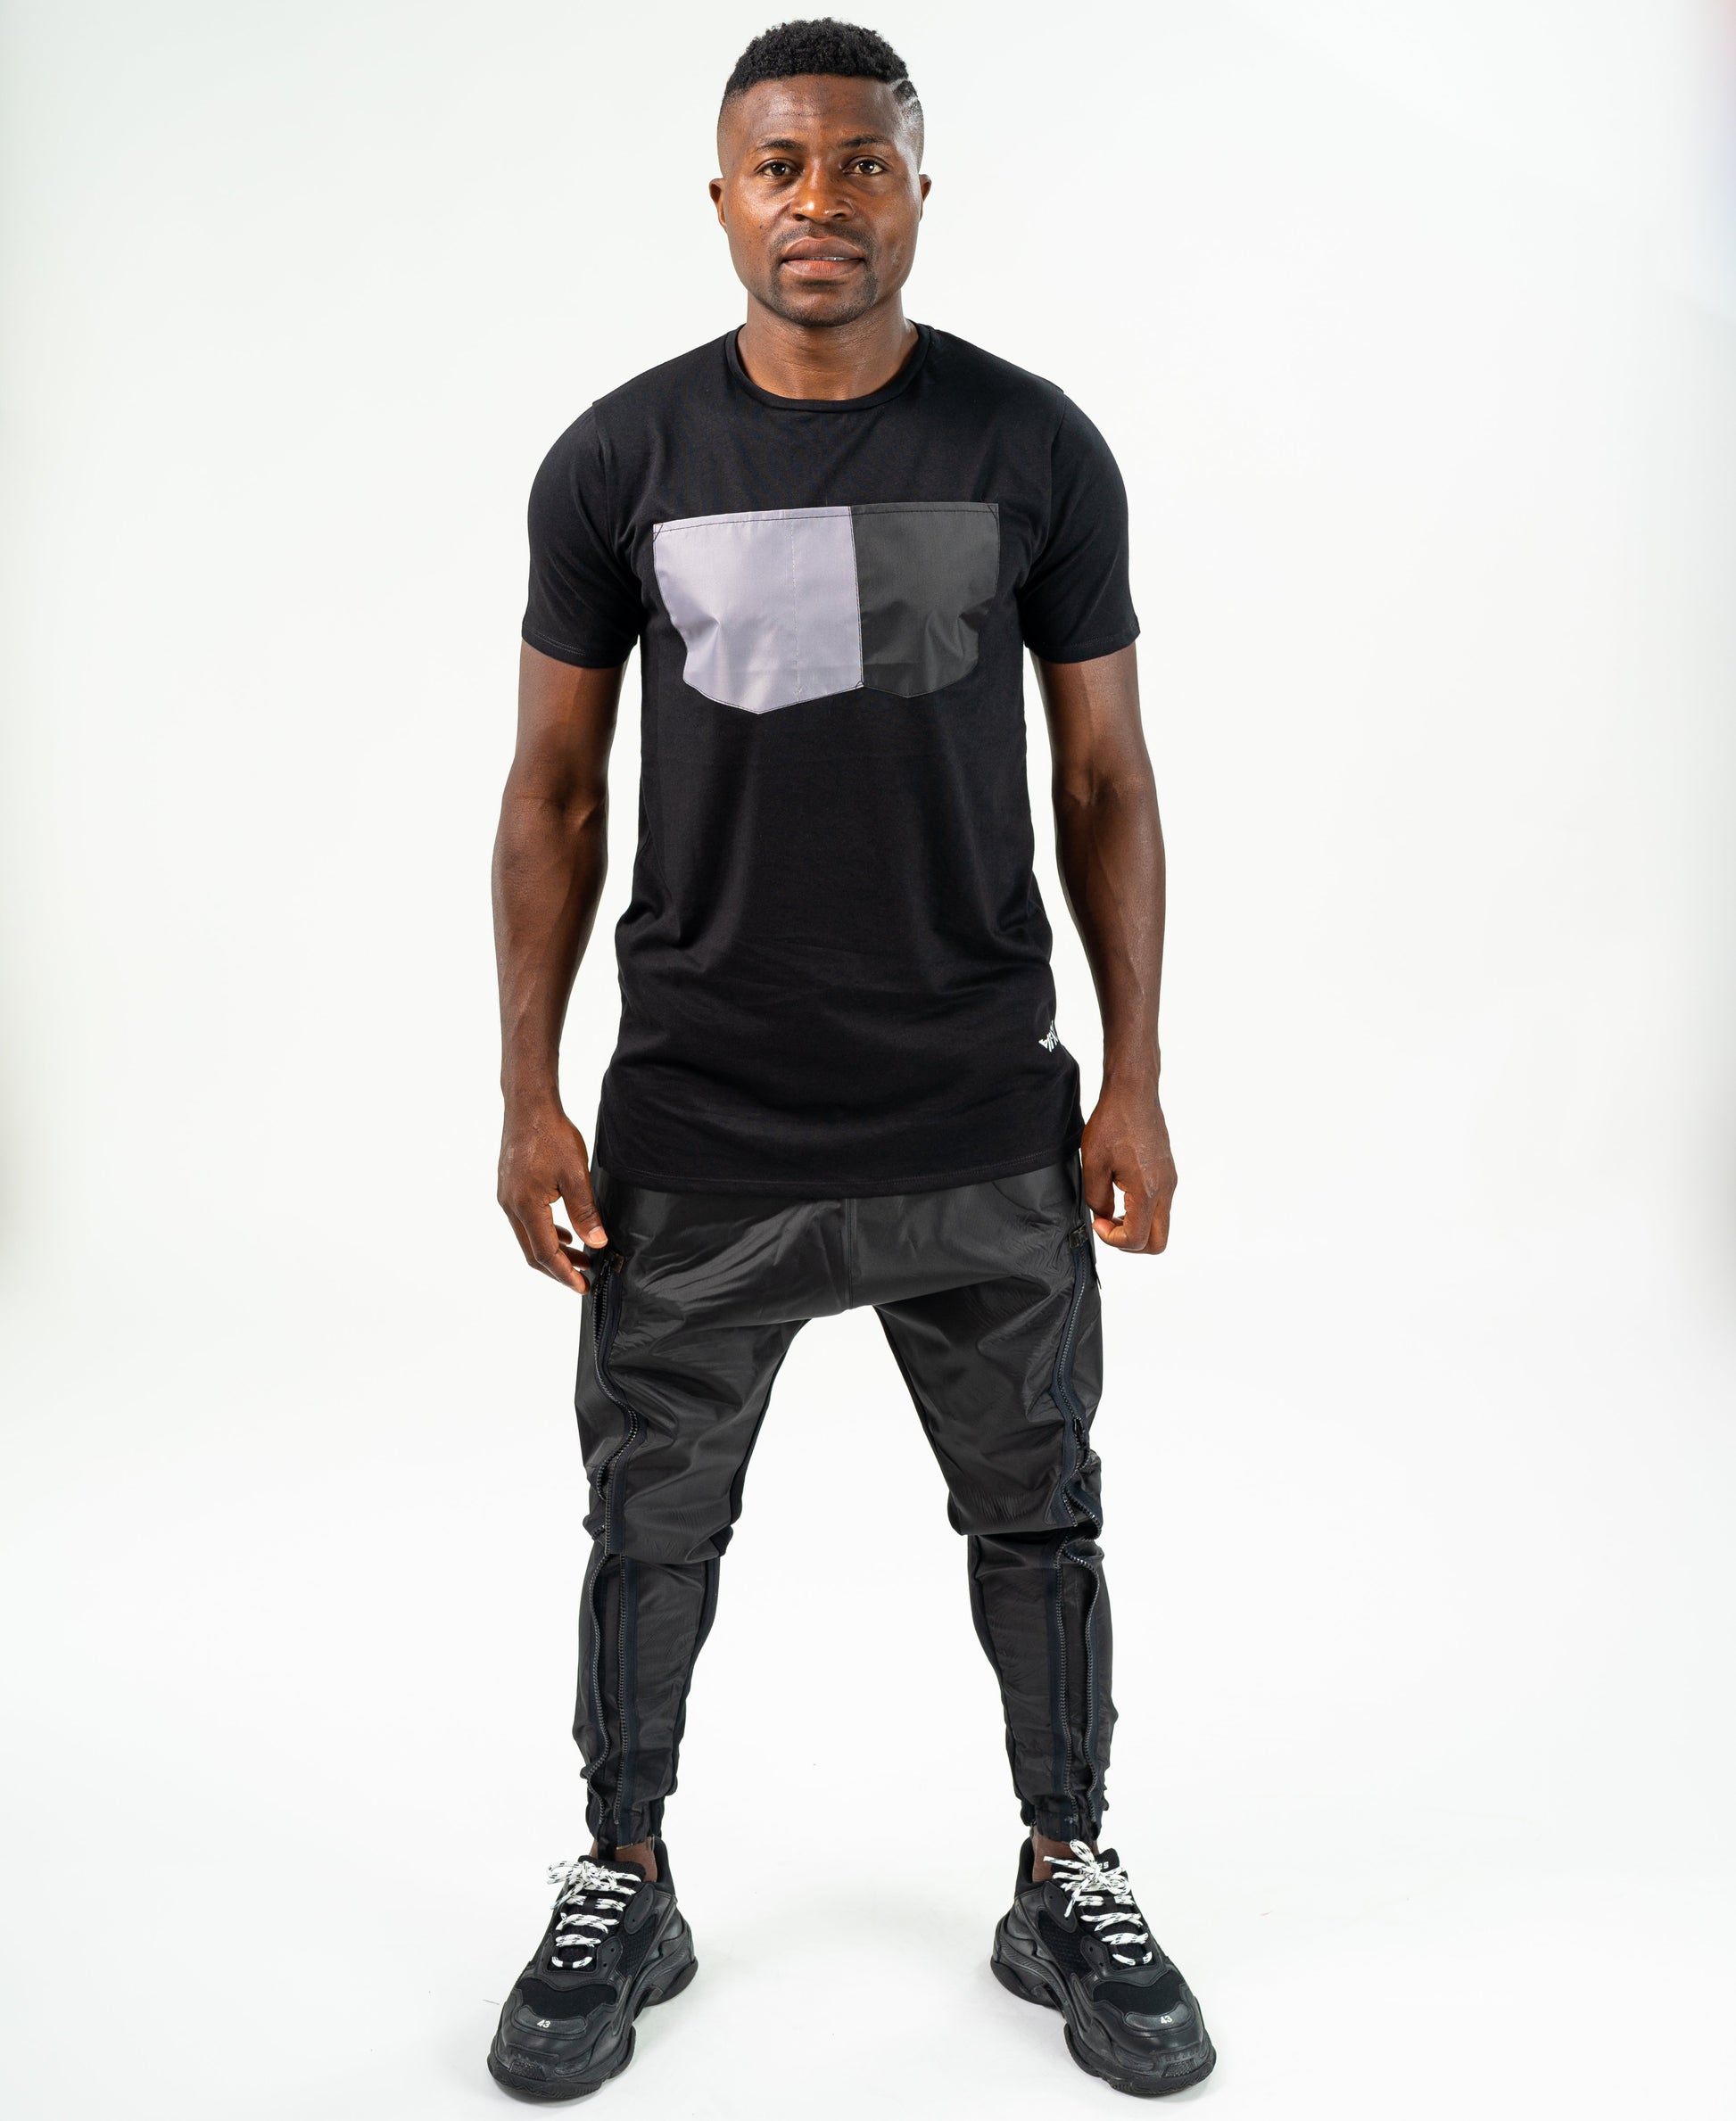 Black t-shirt with black and grey design - Fatai Style